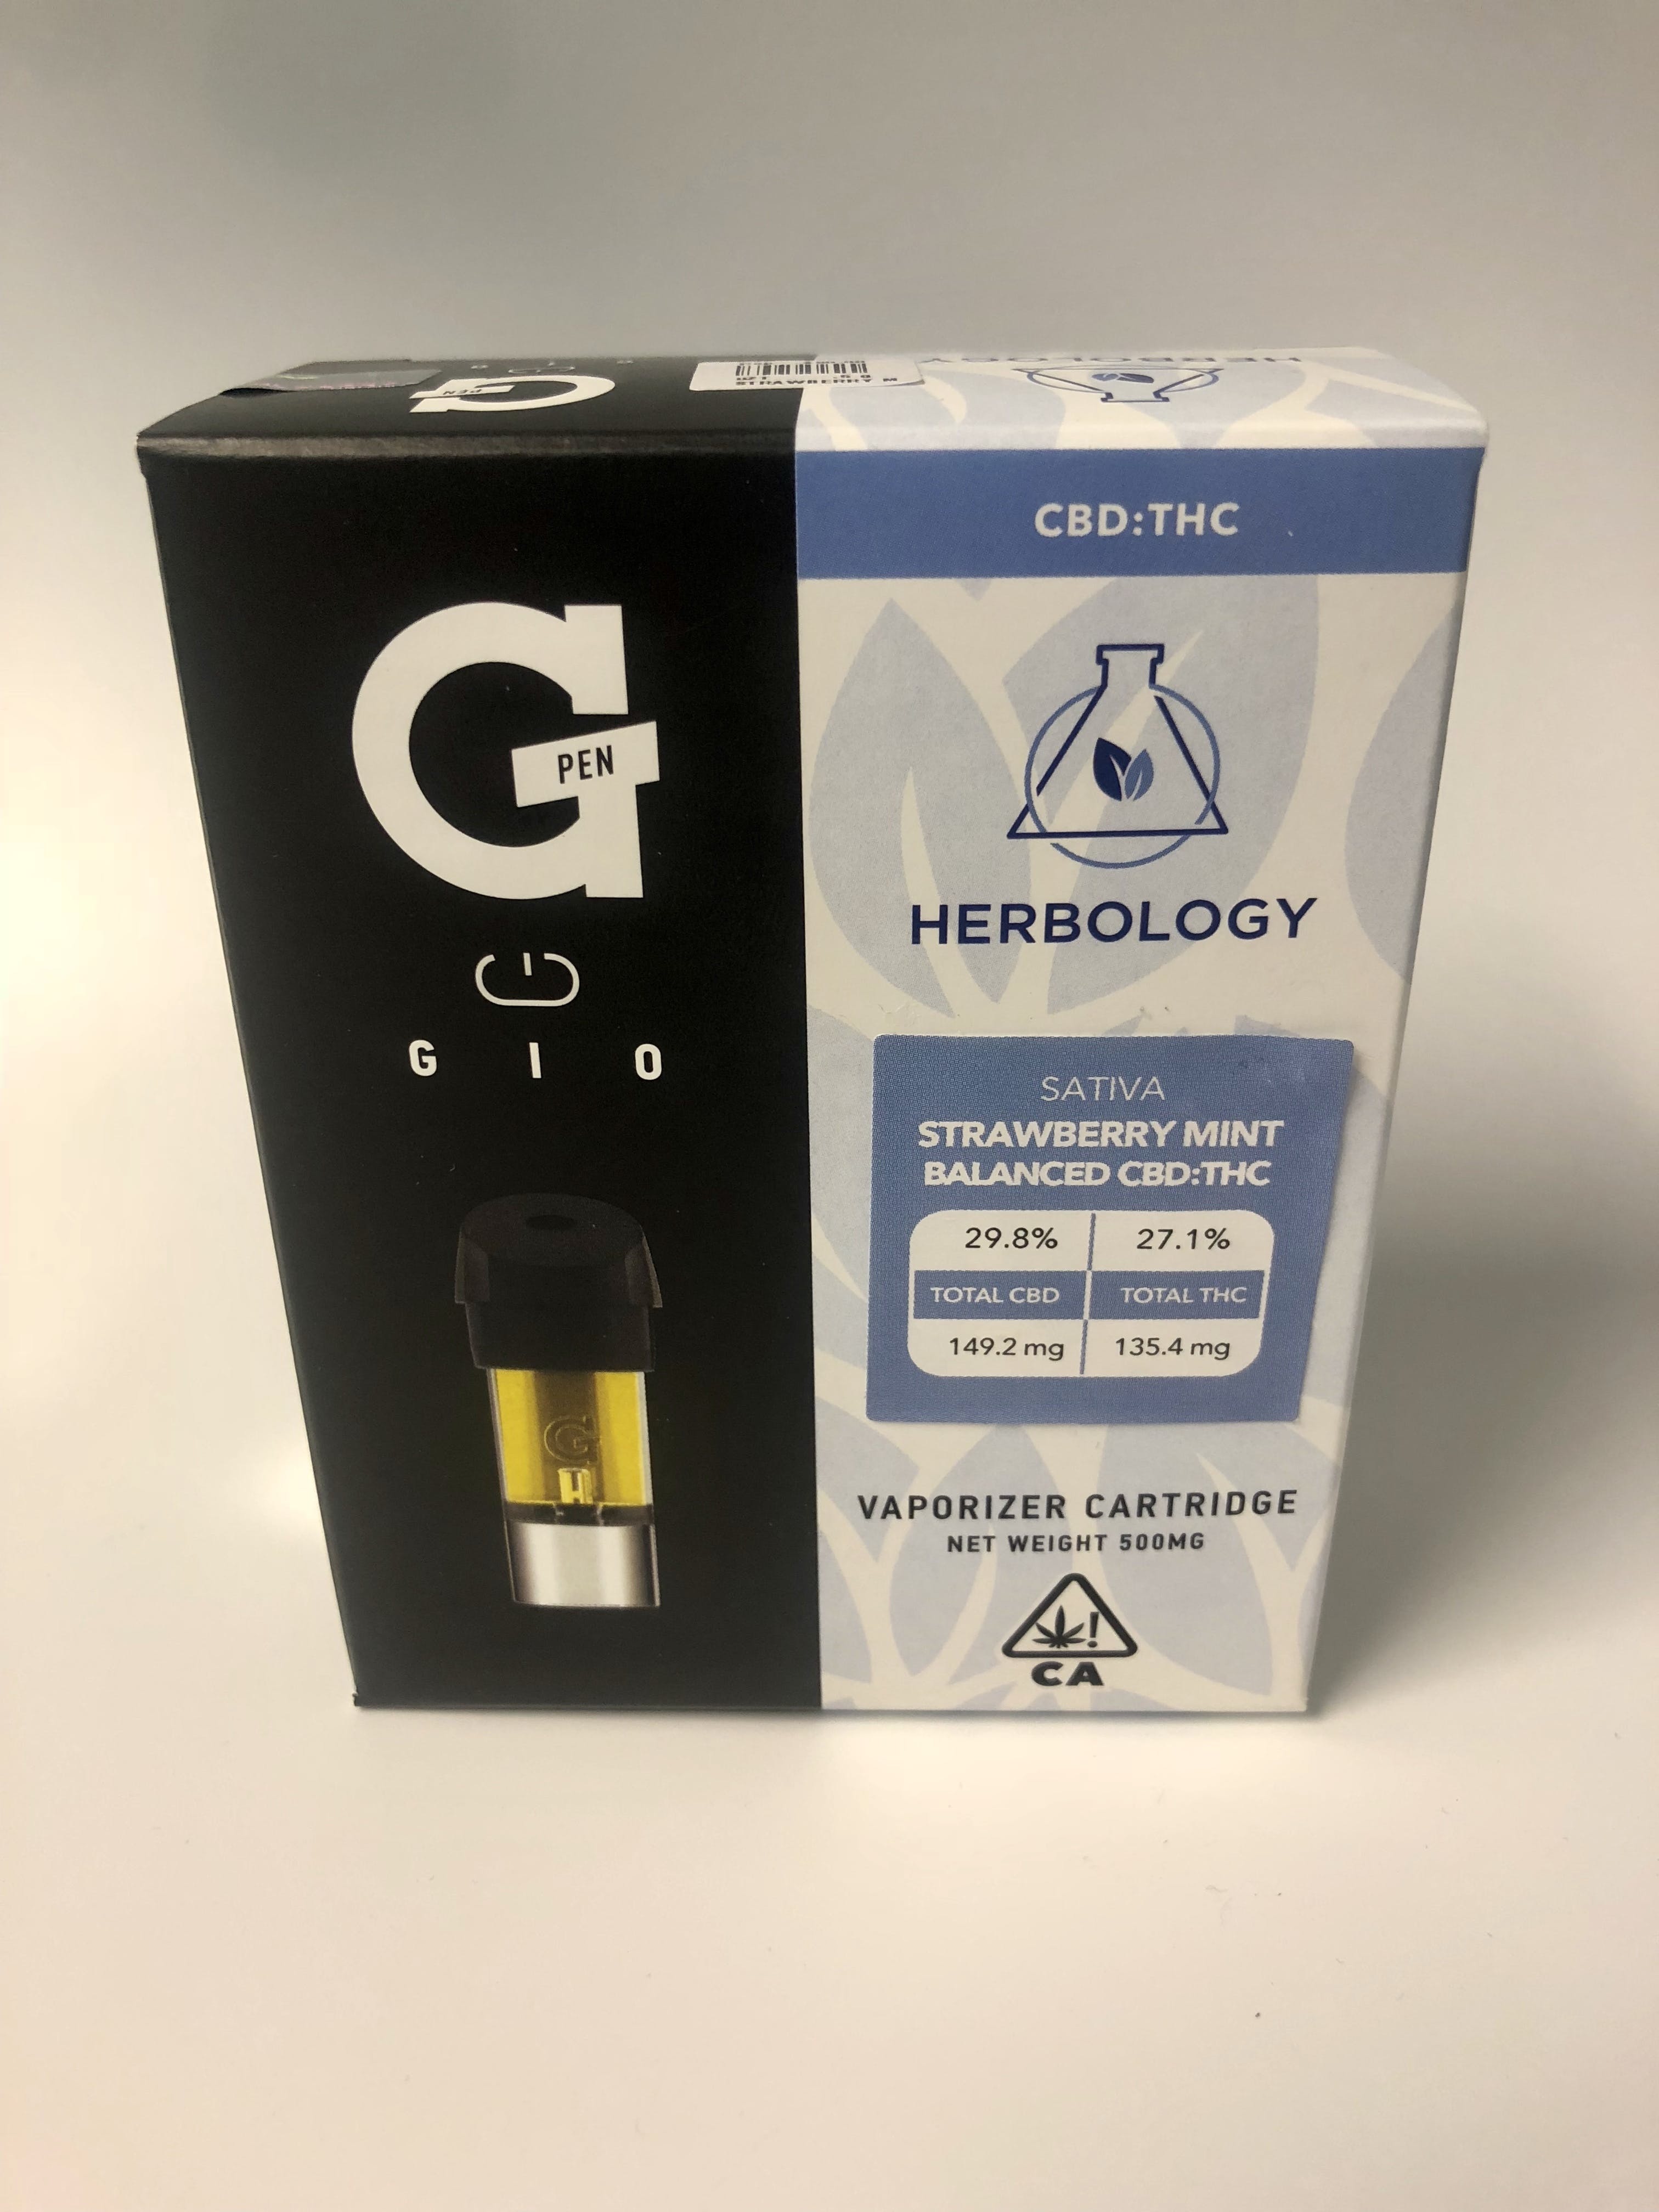 concentrate-strawberry-mint-balanced-cbdthc-herbology-gio-cartridge